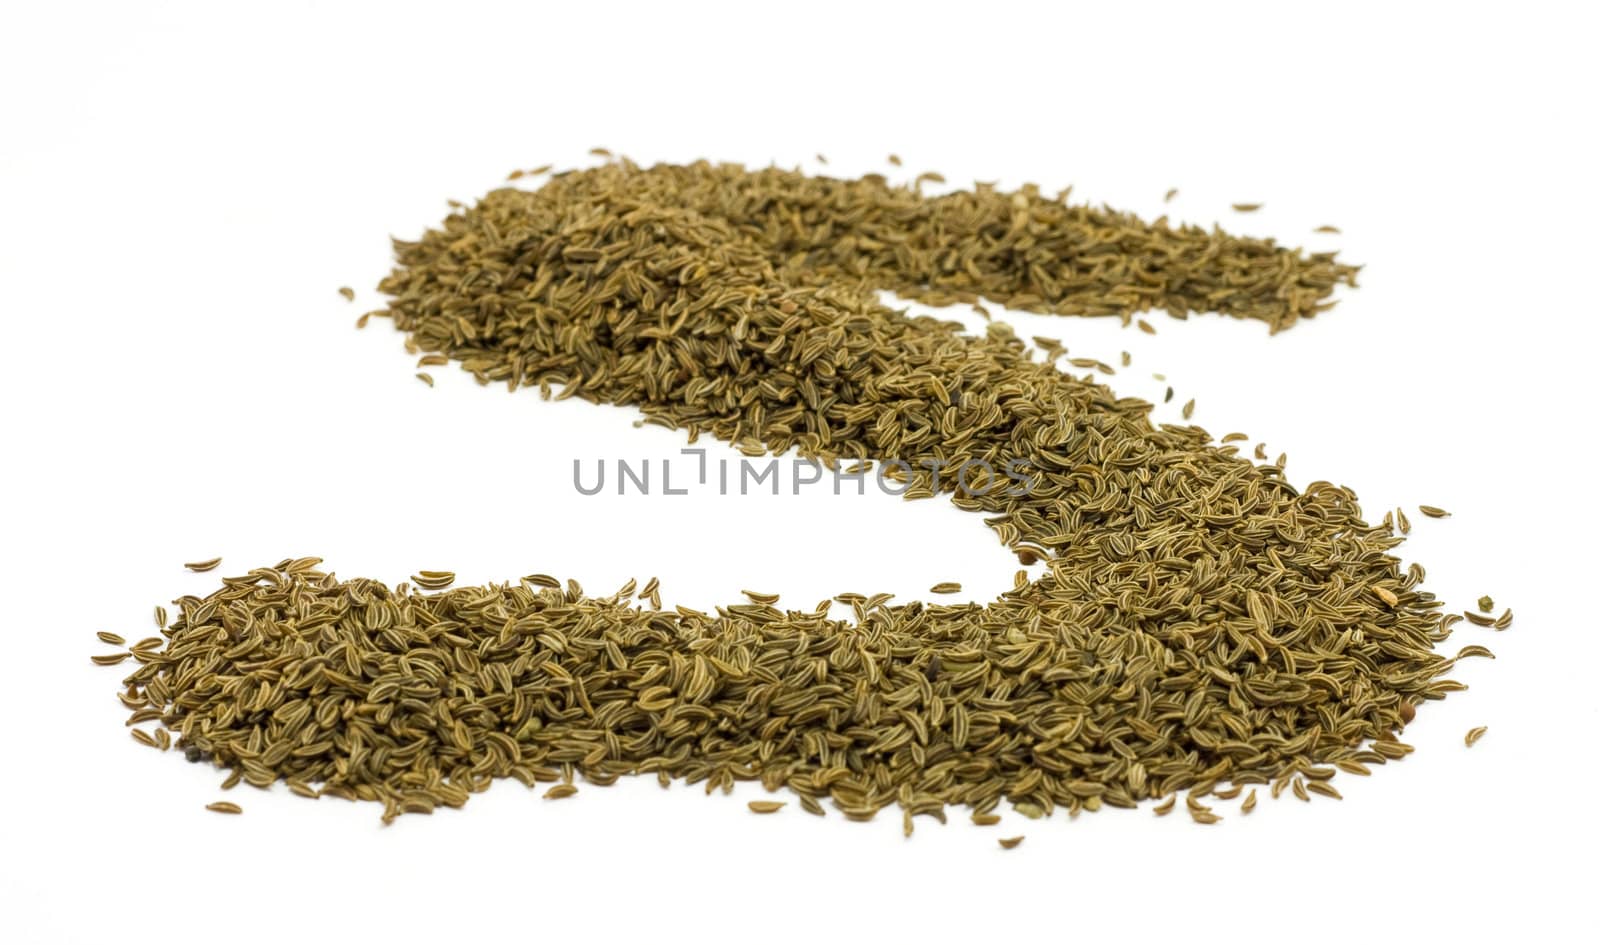 Caraway seeds in S-shape by ursolv